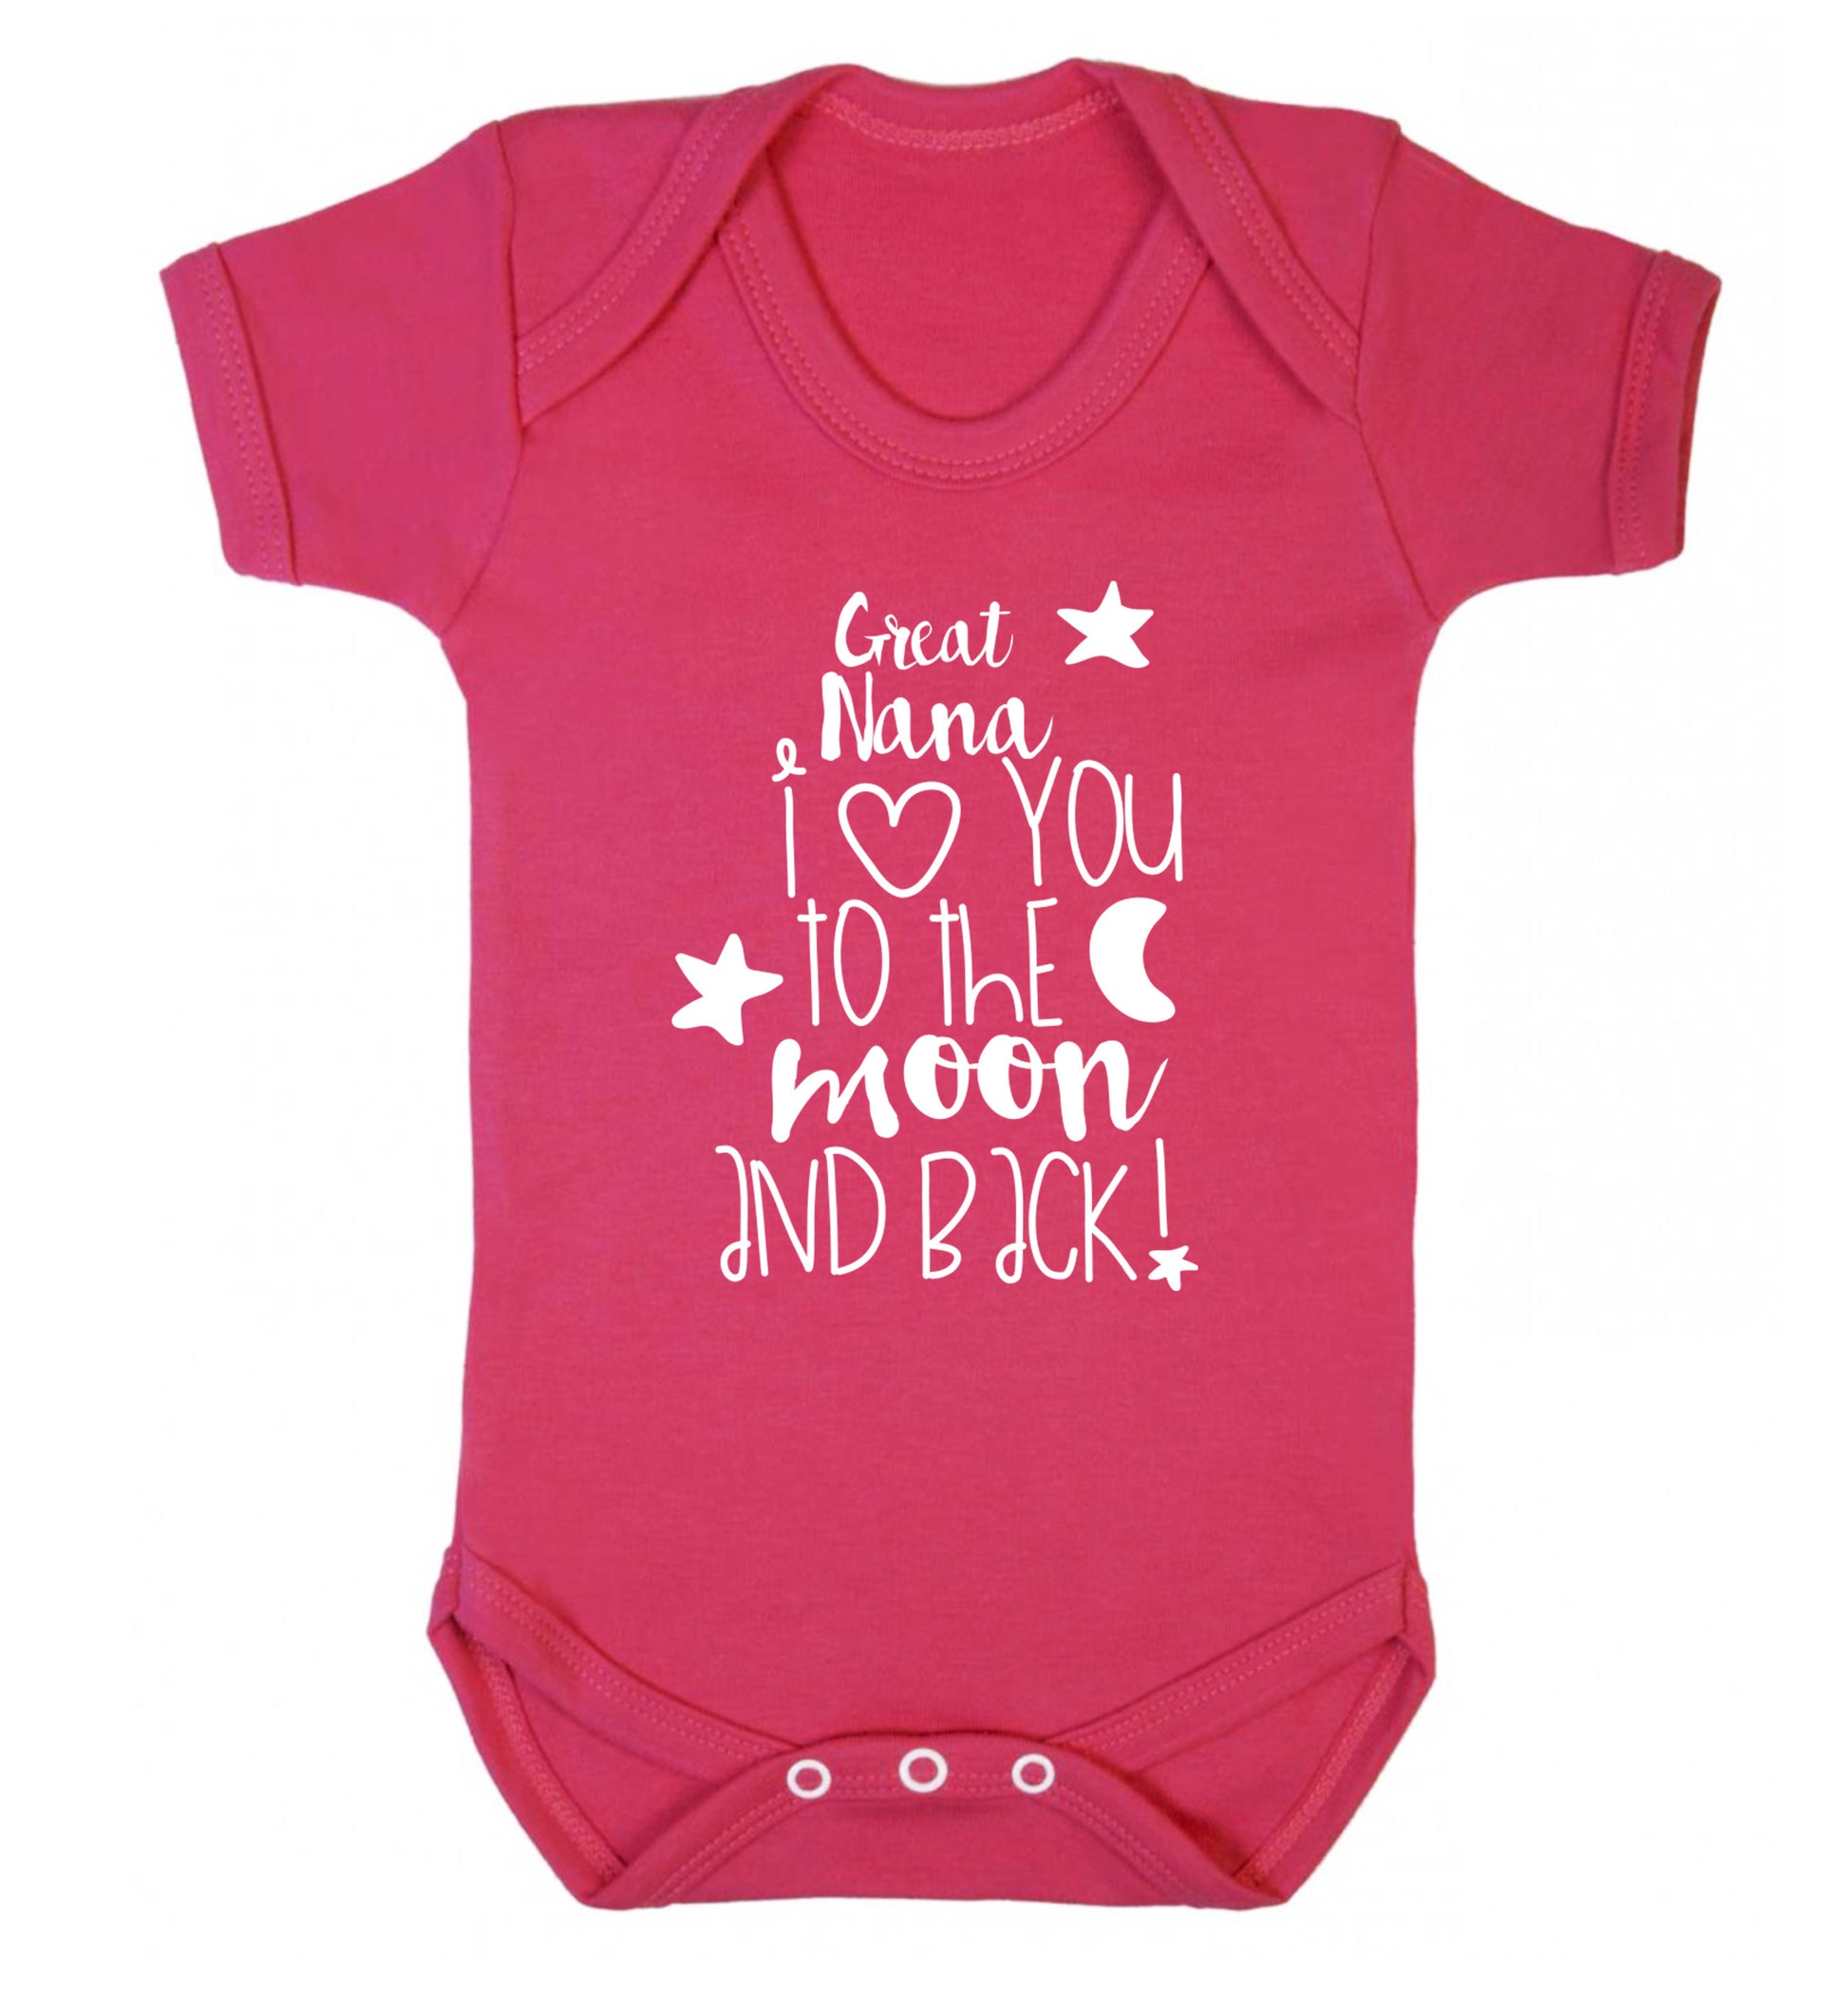 Great Nana I love you to the moon and back Baby Vest dark pink 18-24 months